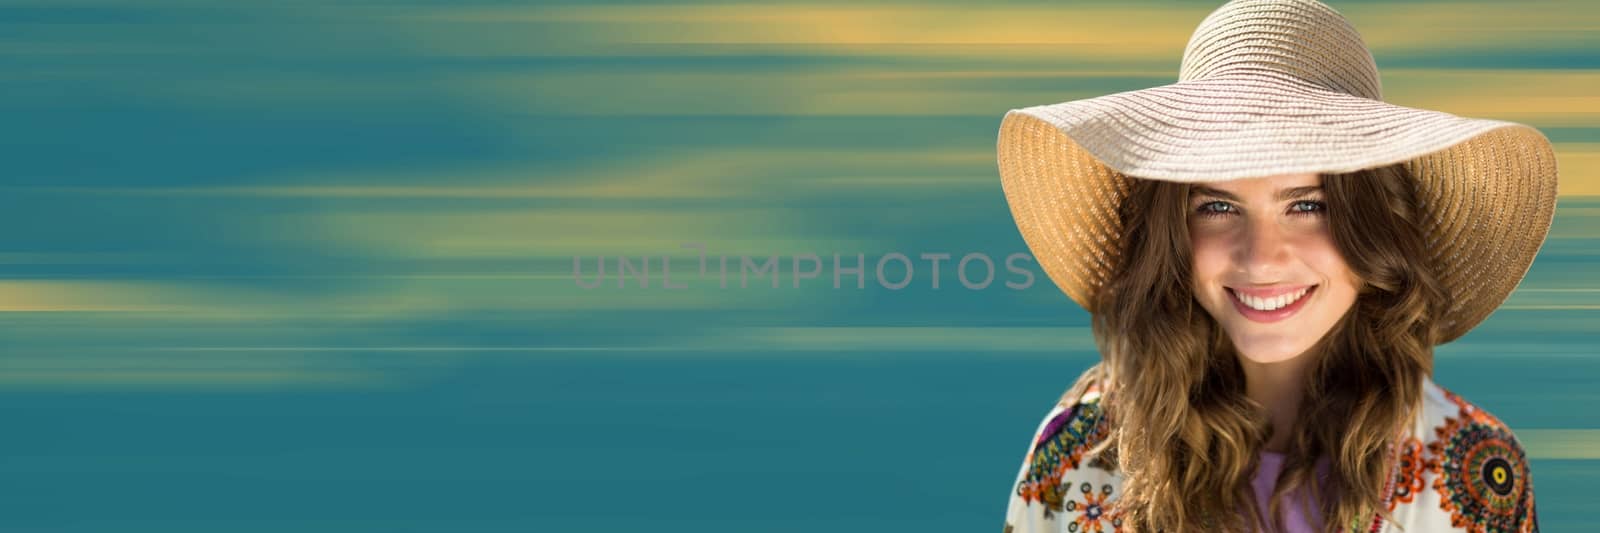 Close up of woman in summer hat against blurry yellow and blue background by Wavebreakmedia